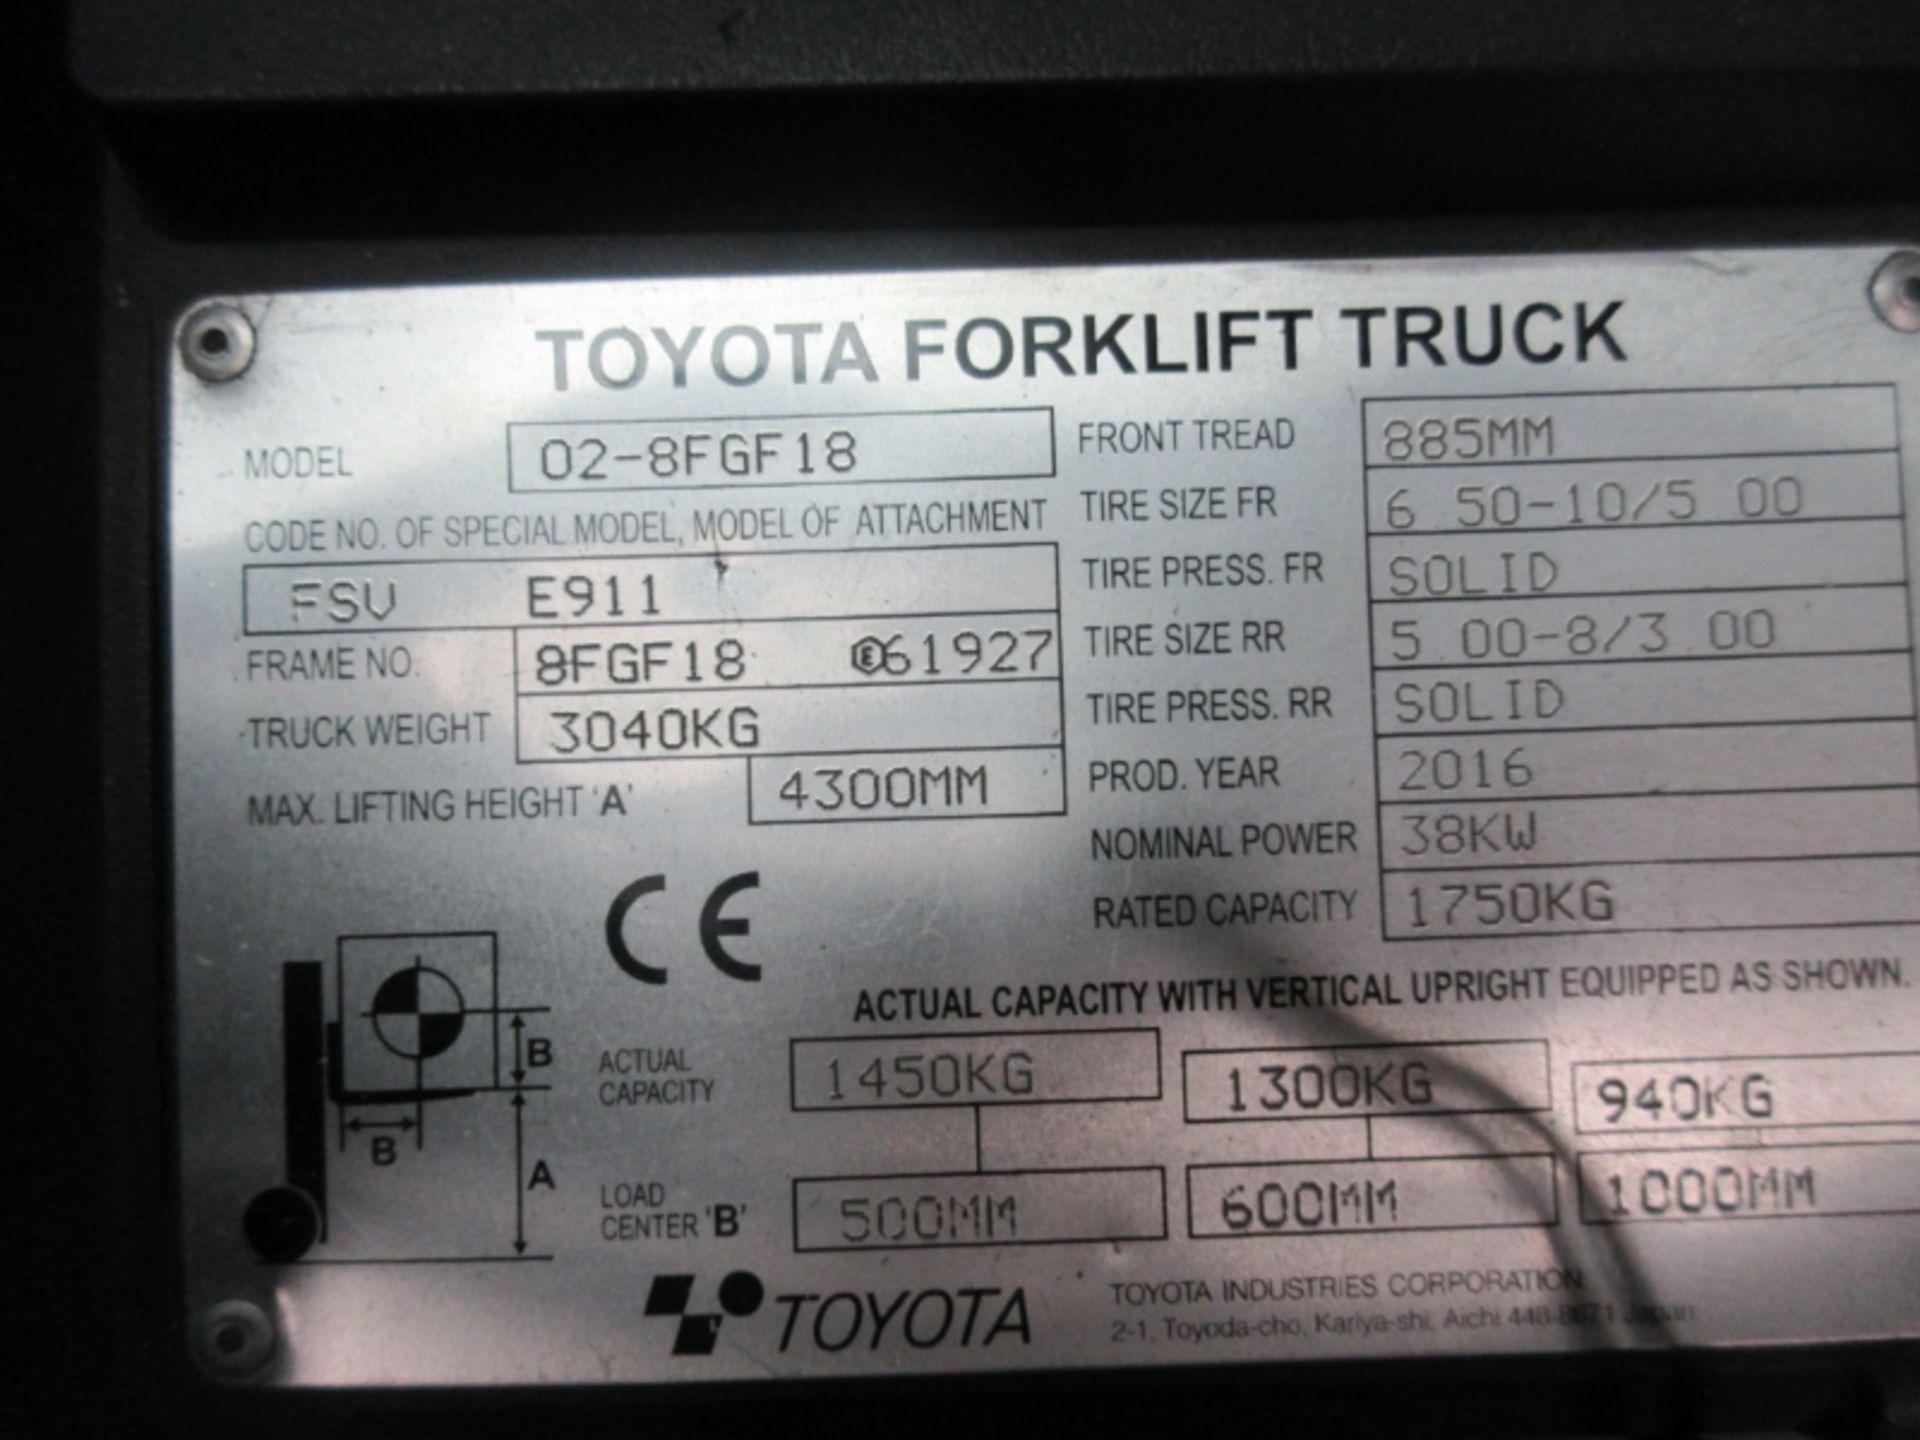 TOYOTA 02-8FGF18 Plant LPG / CNG - VIN: 8FGF18E61927 - Year: 2016 - 10,230 Hours - Triplex Forklift, - Image 6 of 7